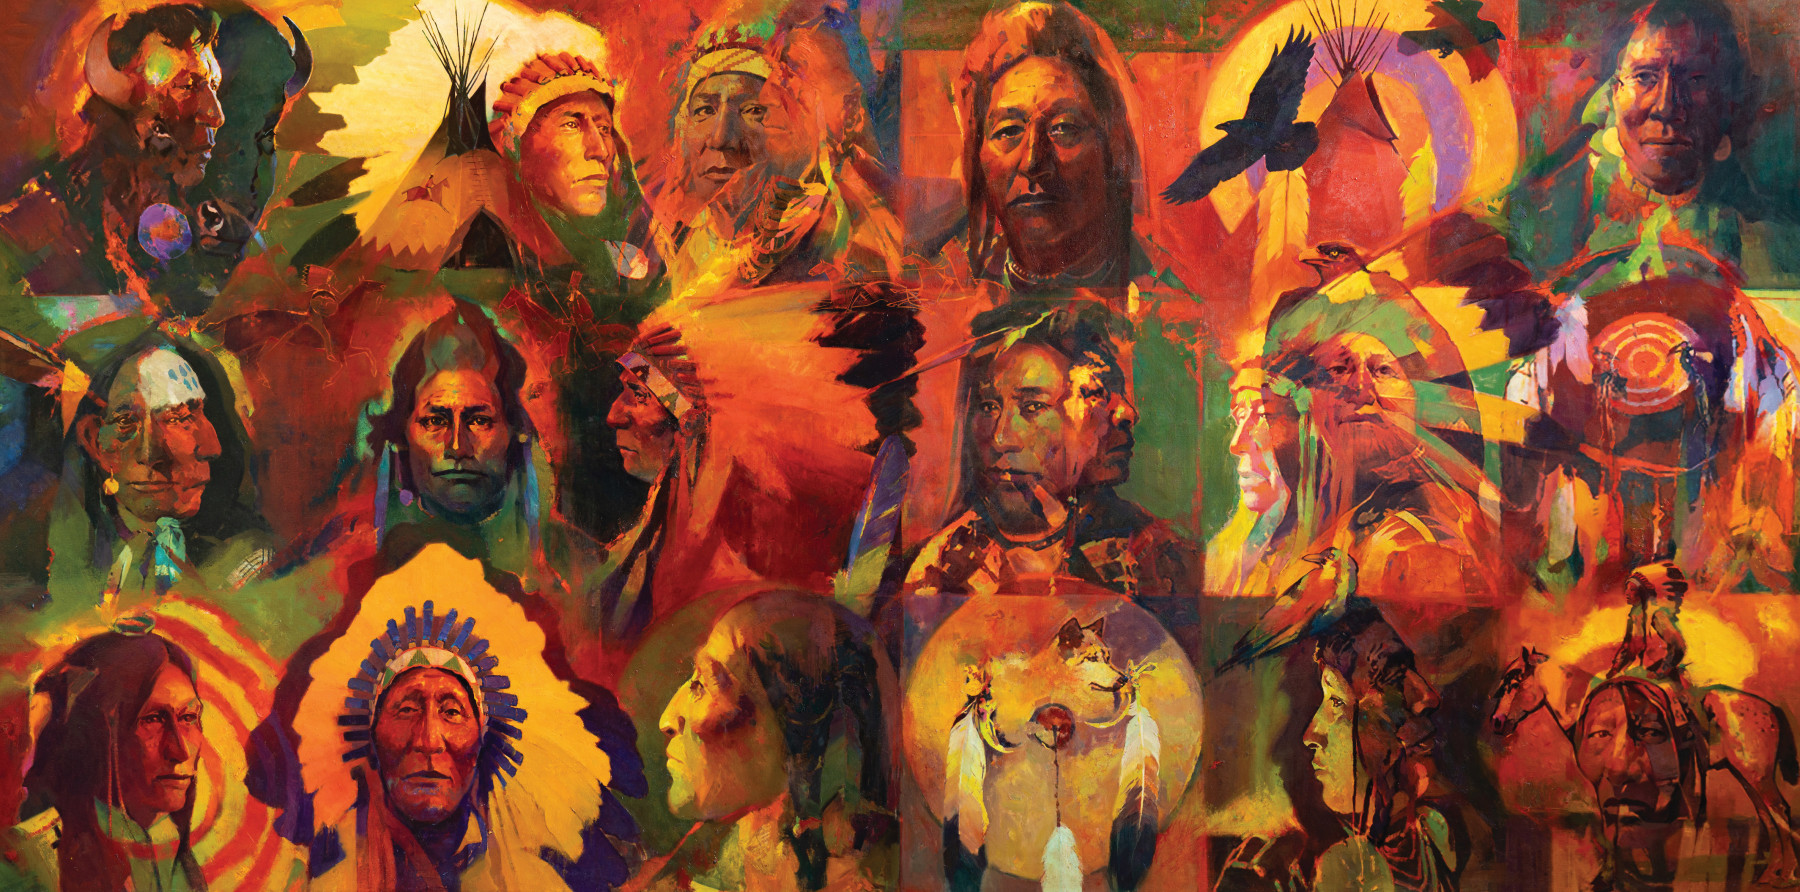 Evolving Evolution
Oil on canvas
60 x 120 inches

&amp;ldquo;Native American lives quickly evolved toward extinction. This painting is painted layer upon layer of not only paint but also image overlaying image over image, layer upon layer&amp;mdash;evolving.&amp;rdquo;&amp;nbsp; &amp;nbsp; &amp;nbsp;&amp;nbsp;- Tom Gilleon